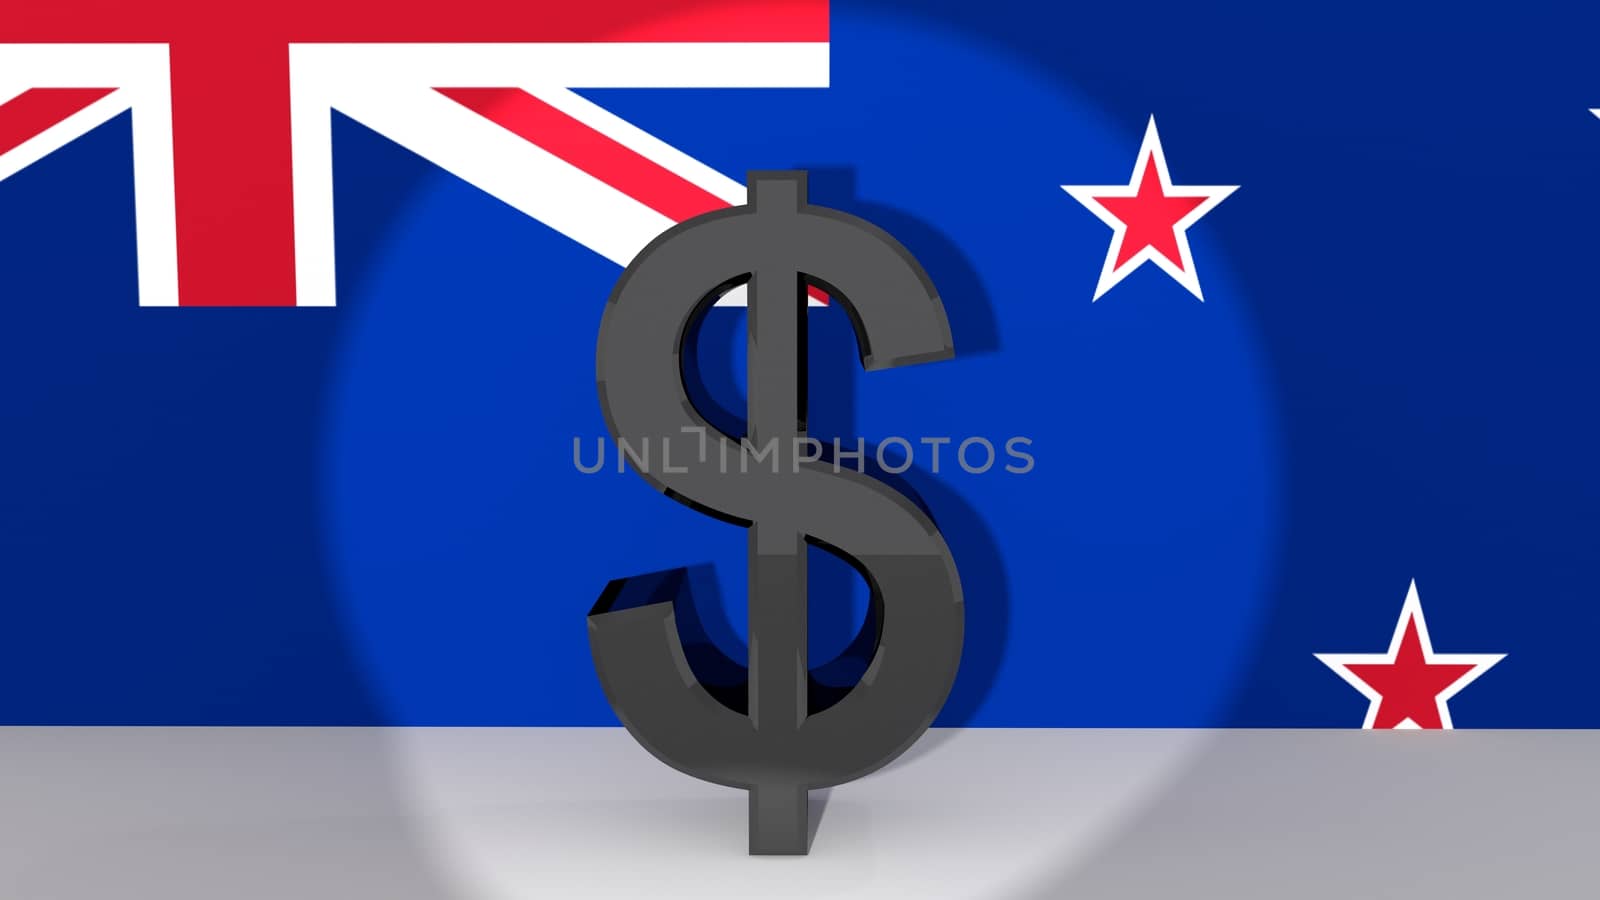 Currency symbol New Zealand Dollar made of dark metal in spotlight in front of flag